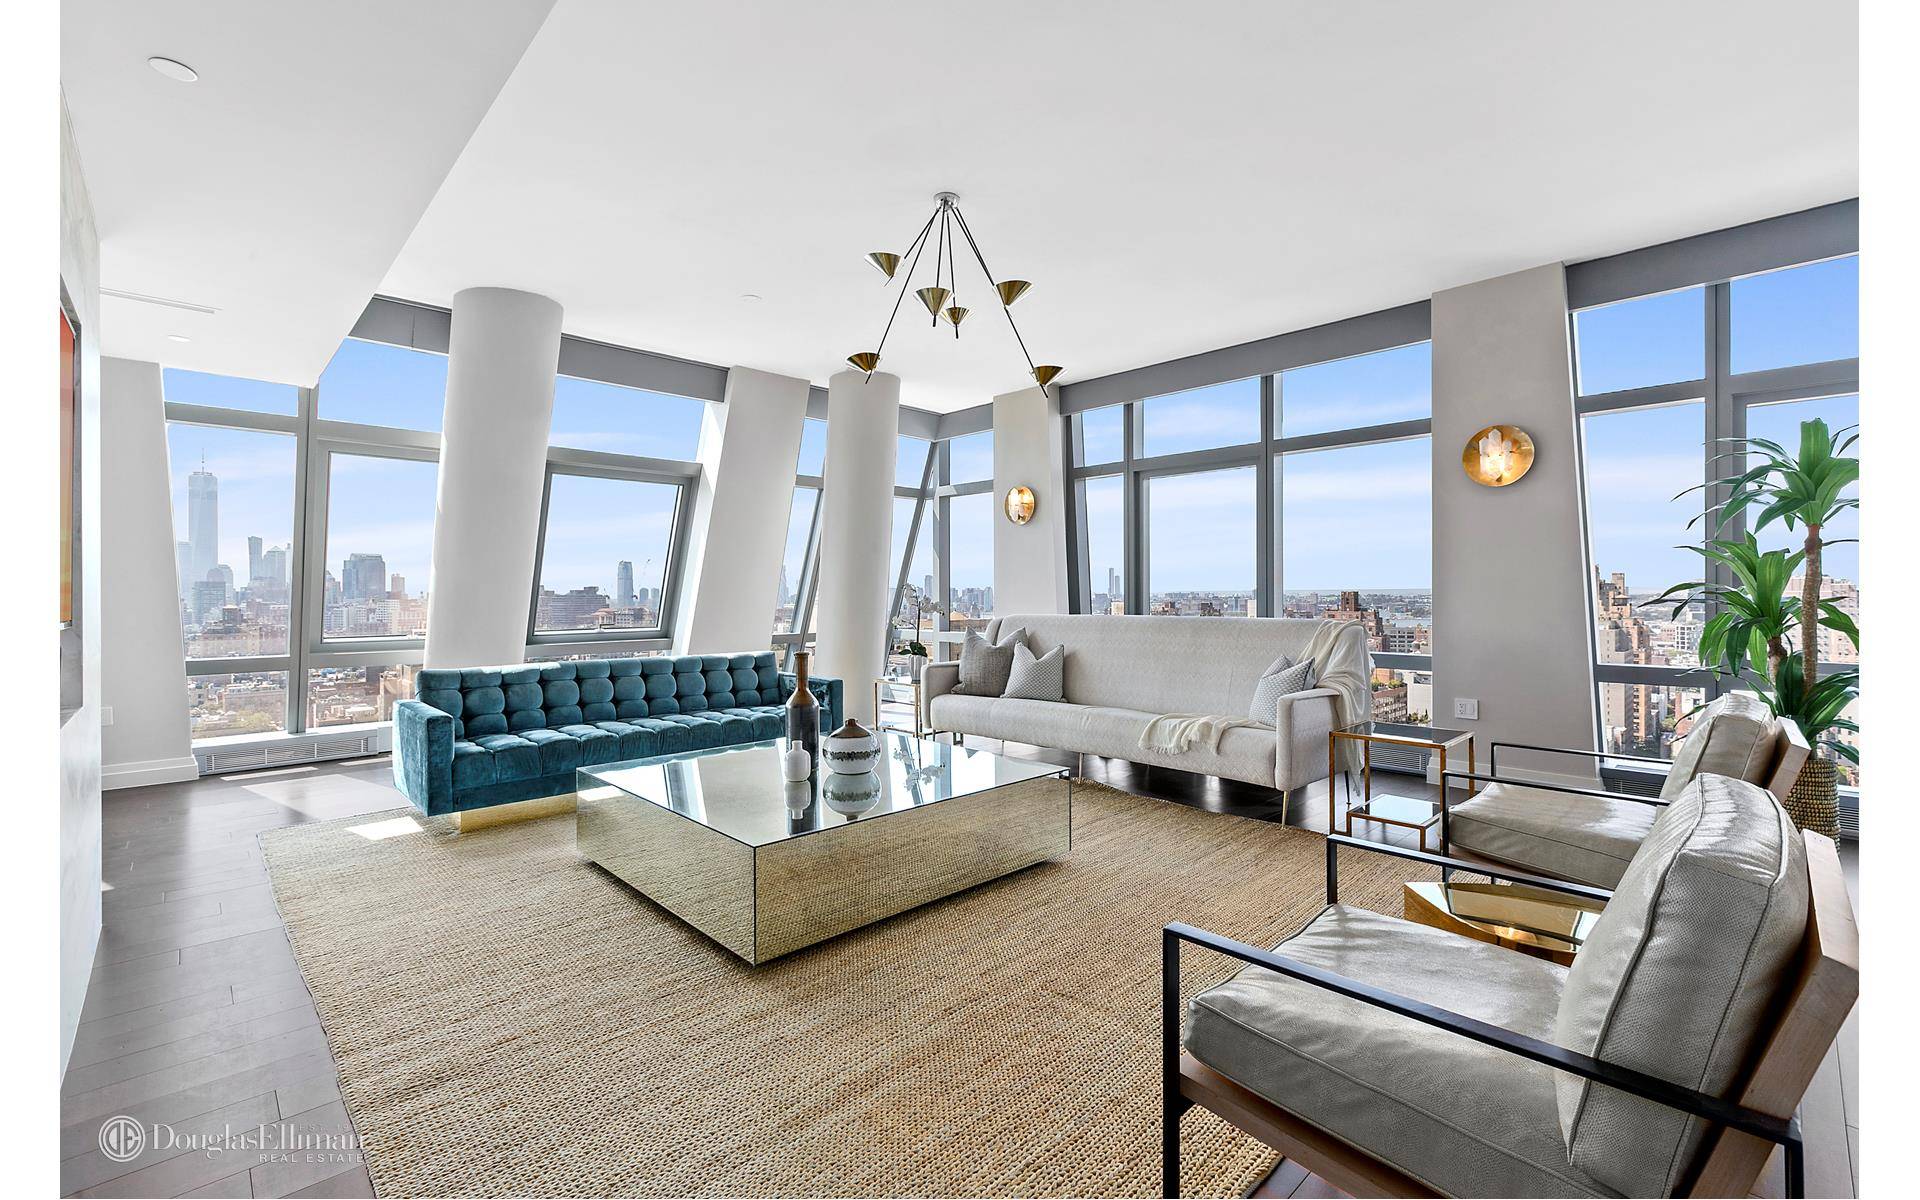 Simply spectacular high floor three bedroom condominium with endless views, three full bathrooms, powder room, central air conditioning, private laundry and twenty four hour doorman, moments from Union Square and ...